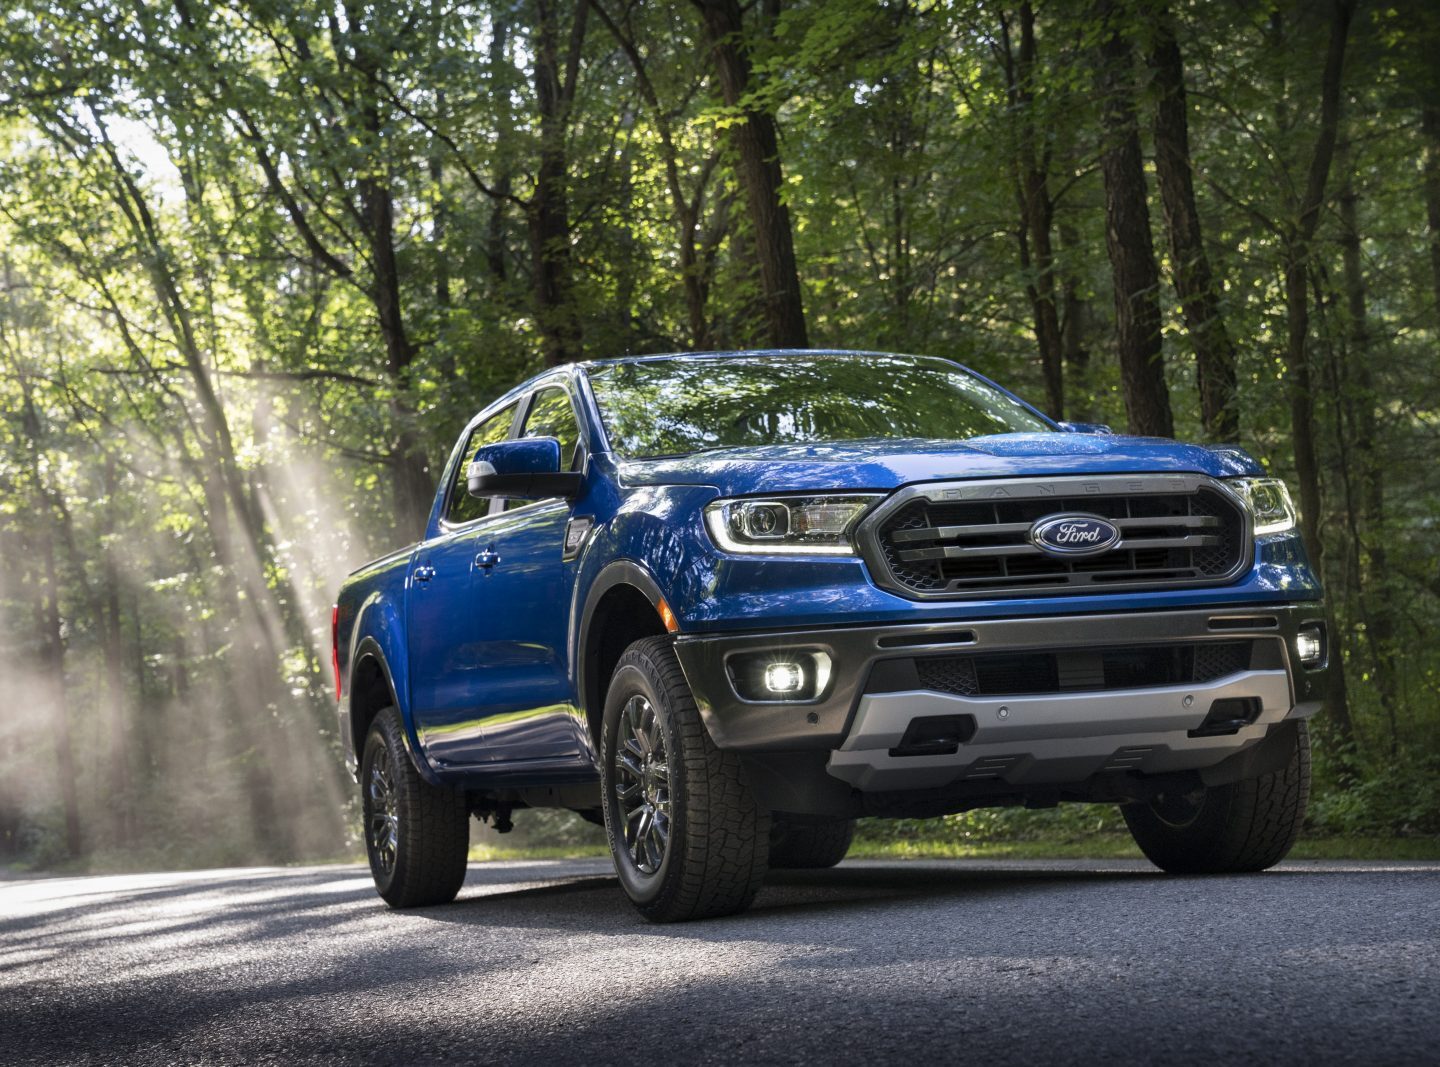 Video Review: 2020 Ford Ranger